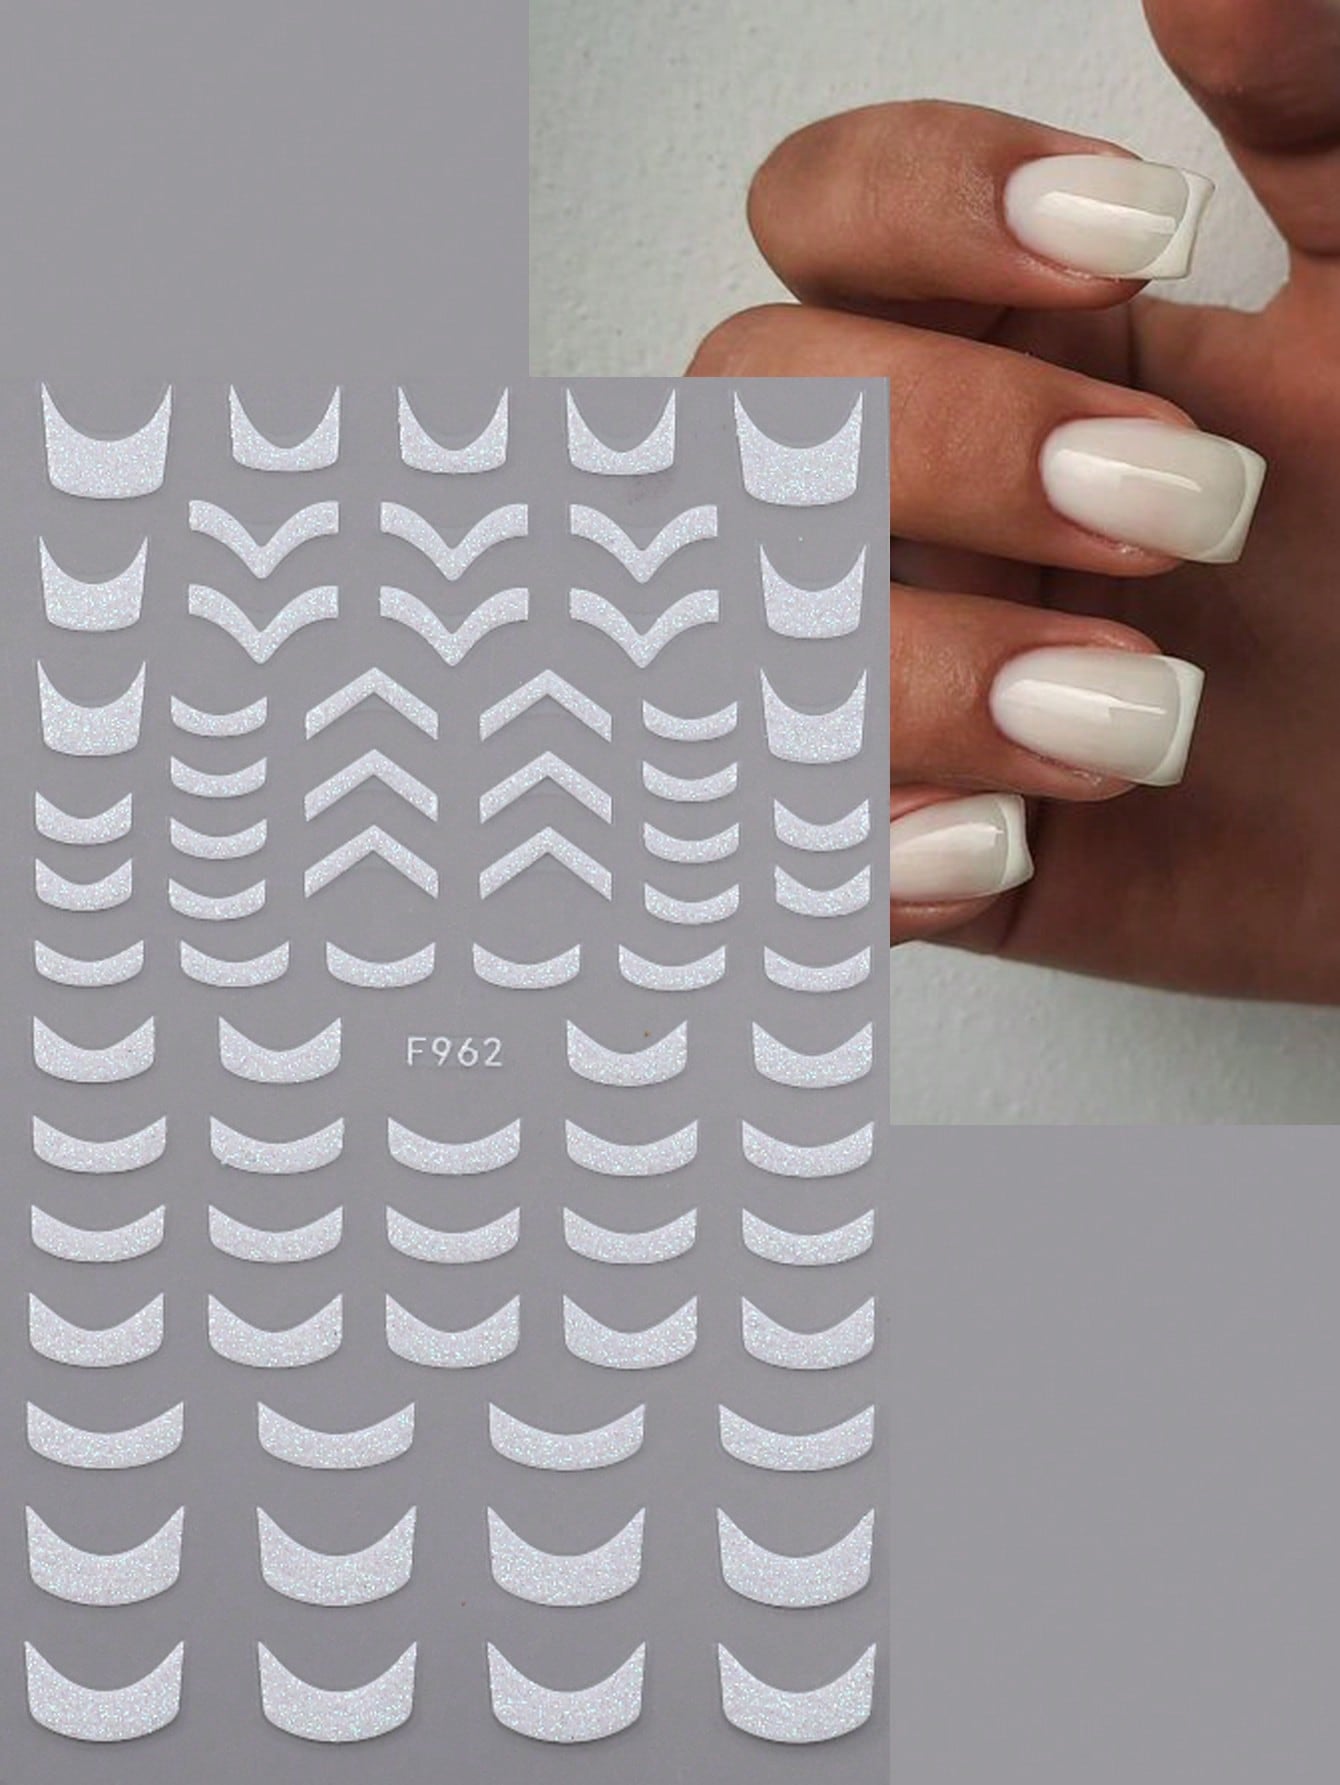 Beauty from Beyond French Manicure Nail Art Stickers, Self-Adhesive Nail Tips Guides for DIY Decoration Stencil Tools🔥